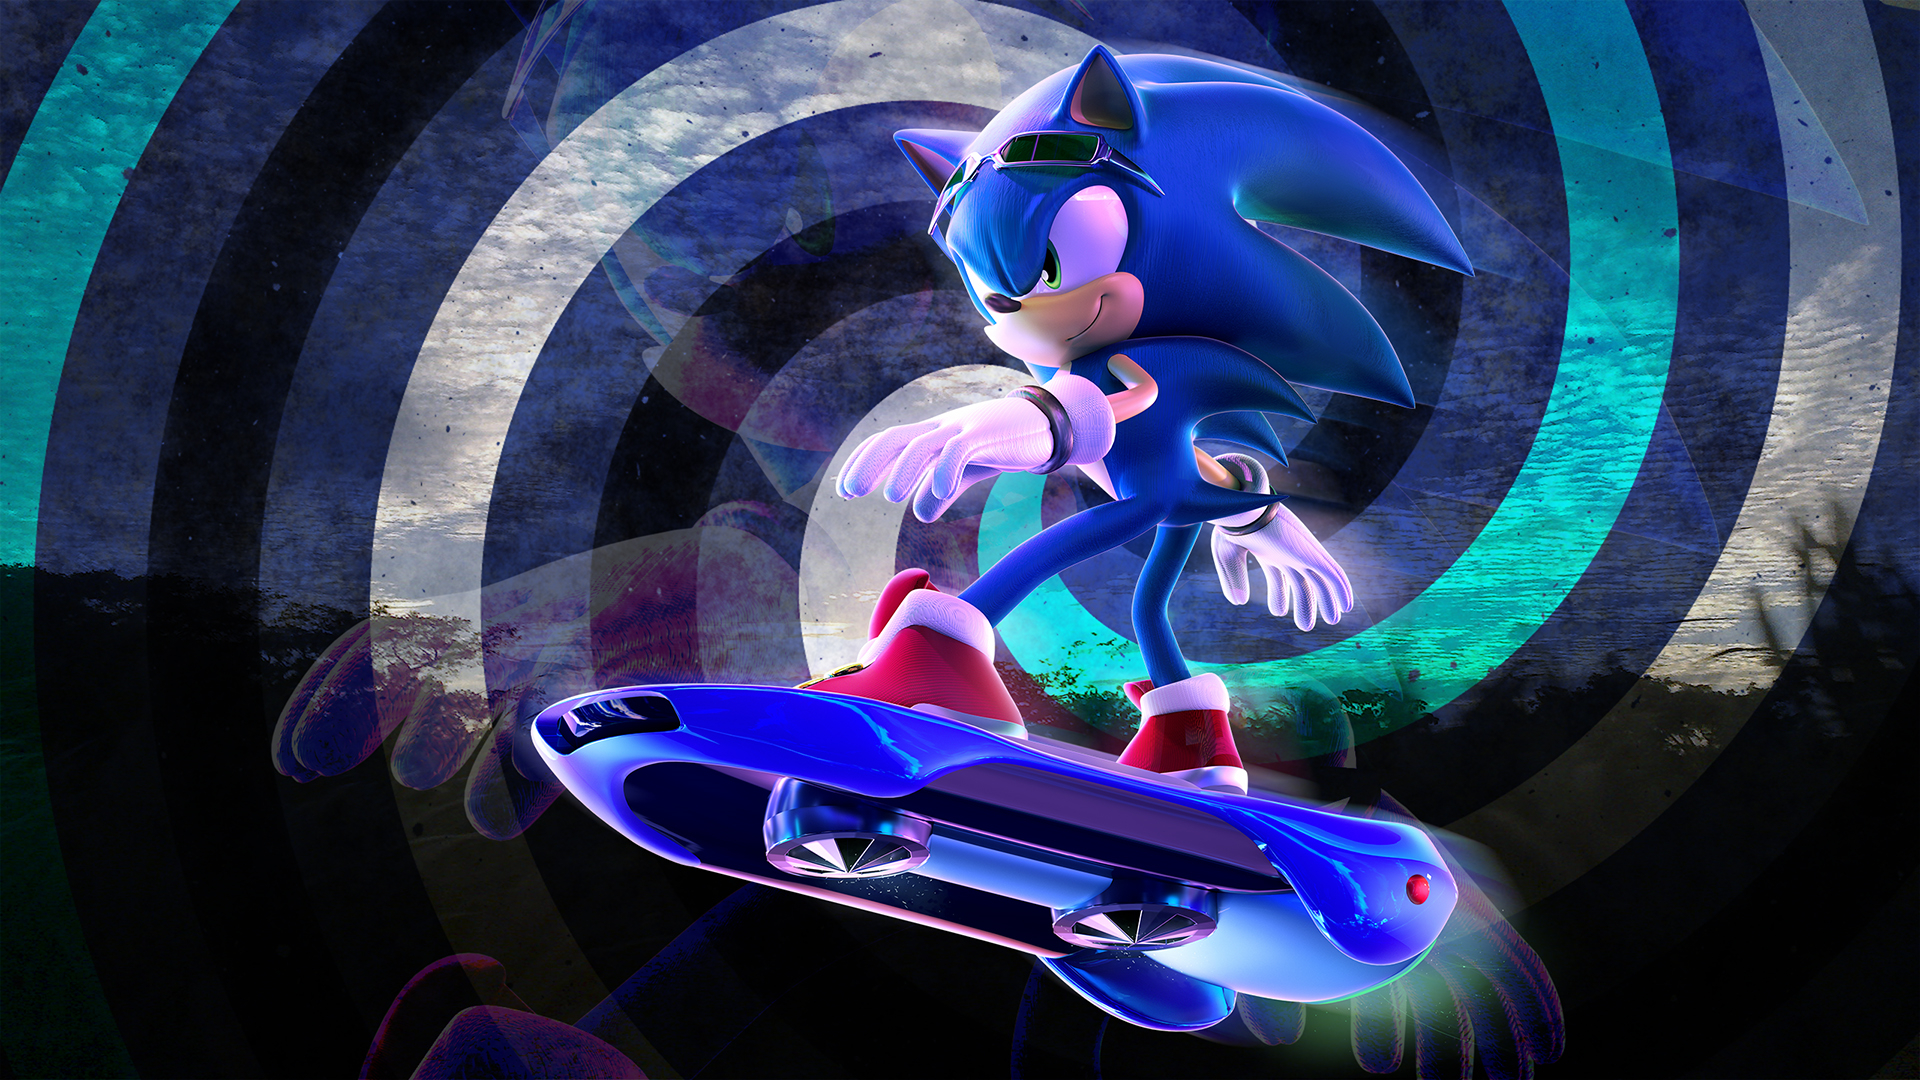 1920x1080 Sonic the Hedgehog from Sonic Riders by Light-Rock by Light-Rock